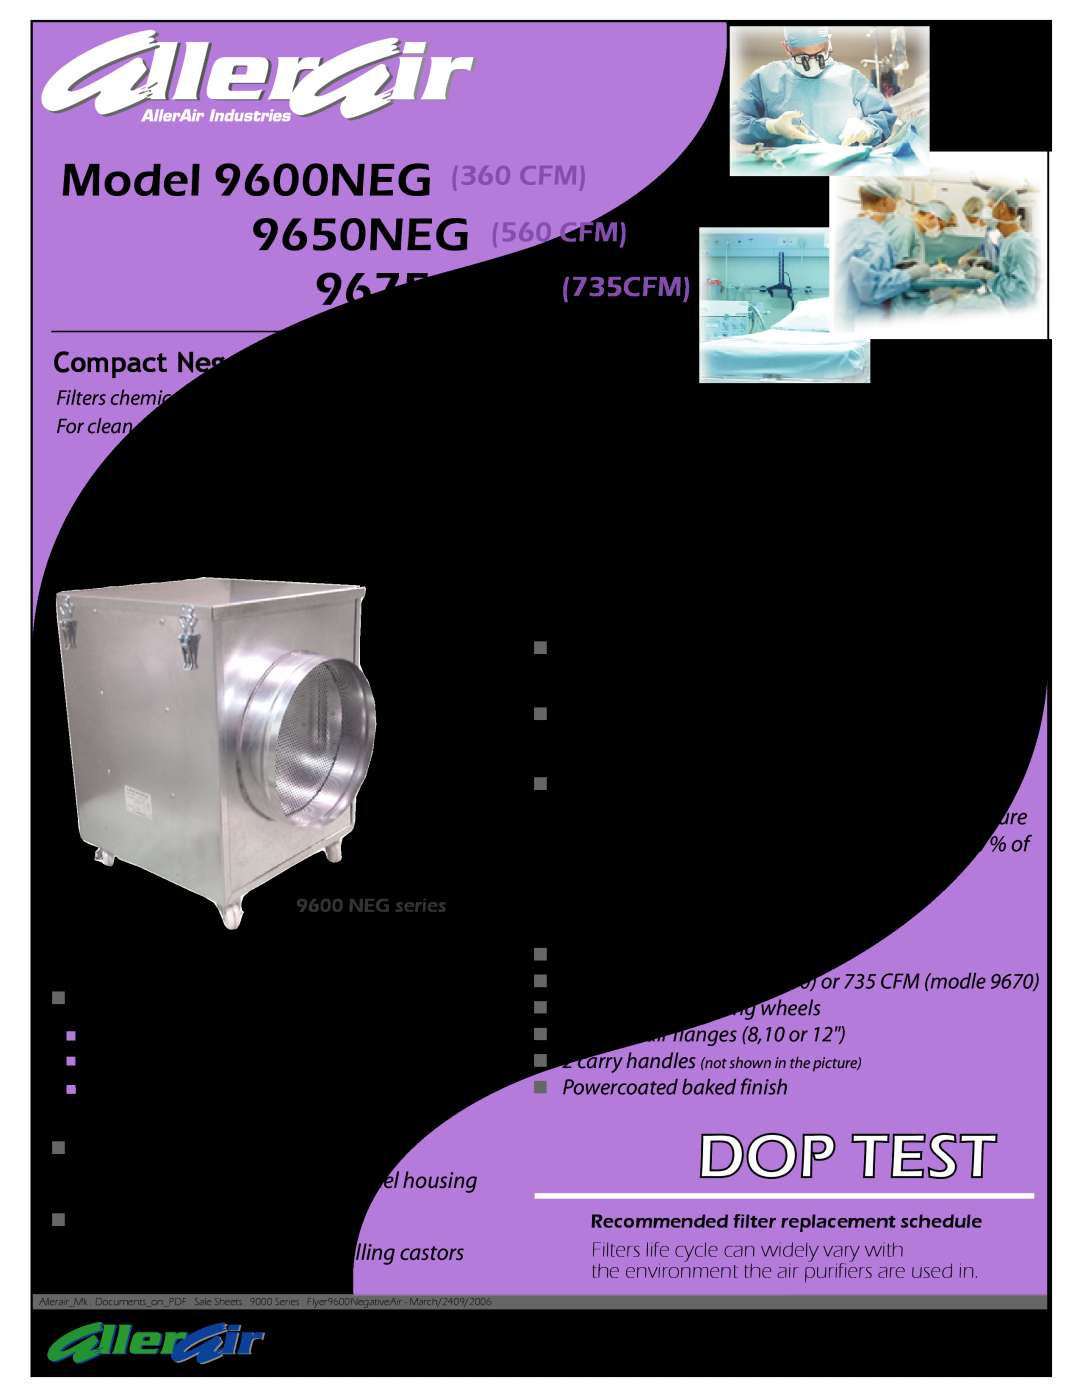 AllerAir 9650NEG manual Dop Test, Model 9600NEG 360 CFM, Isolation wards, Negative air applications, Features, Optons 